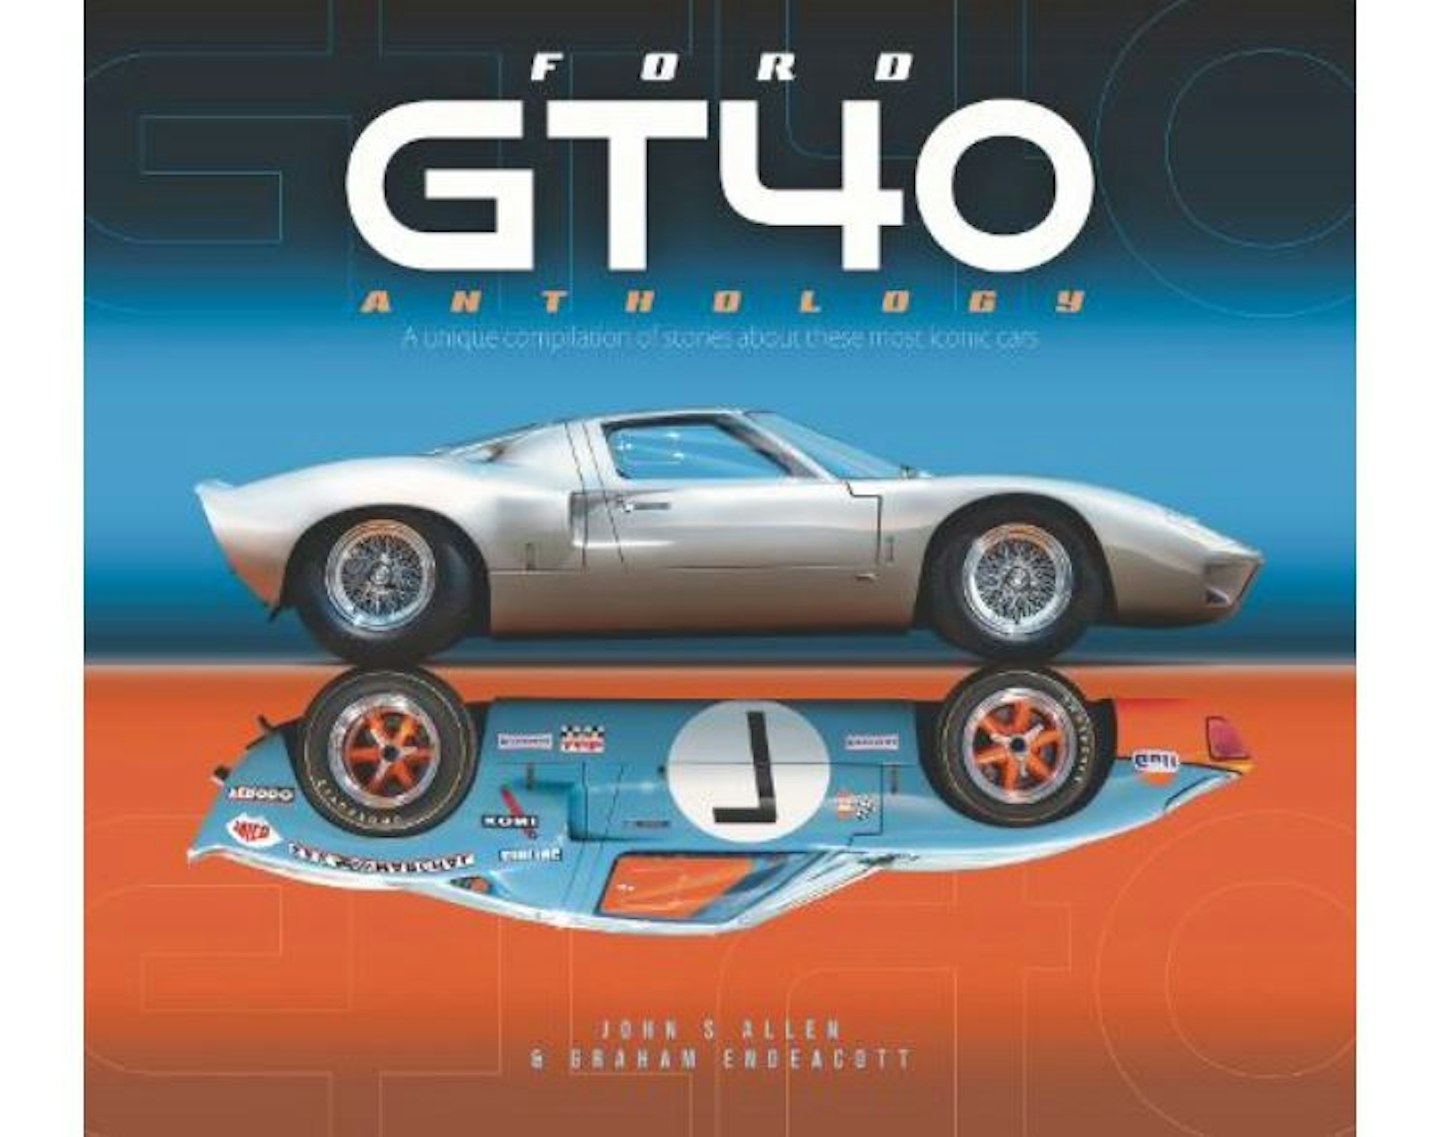 Ford GT40 Anthology: A Unique Compilation of Stories About These Most Iconic Cars